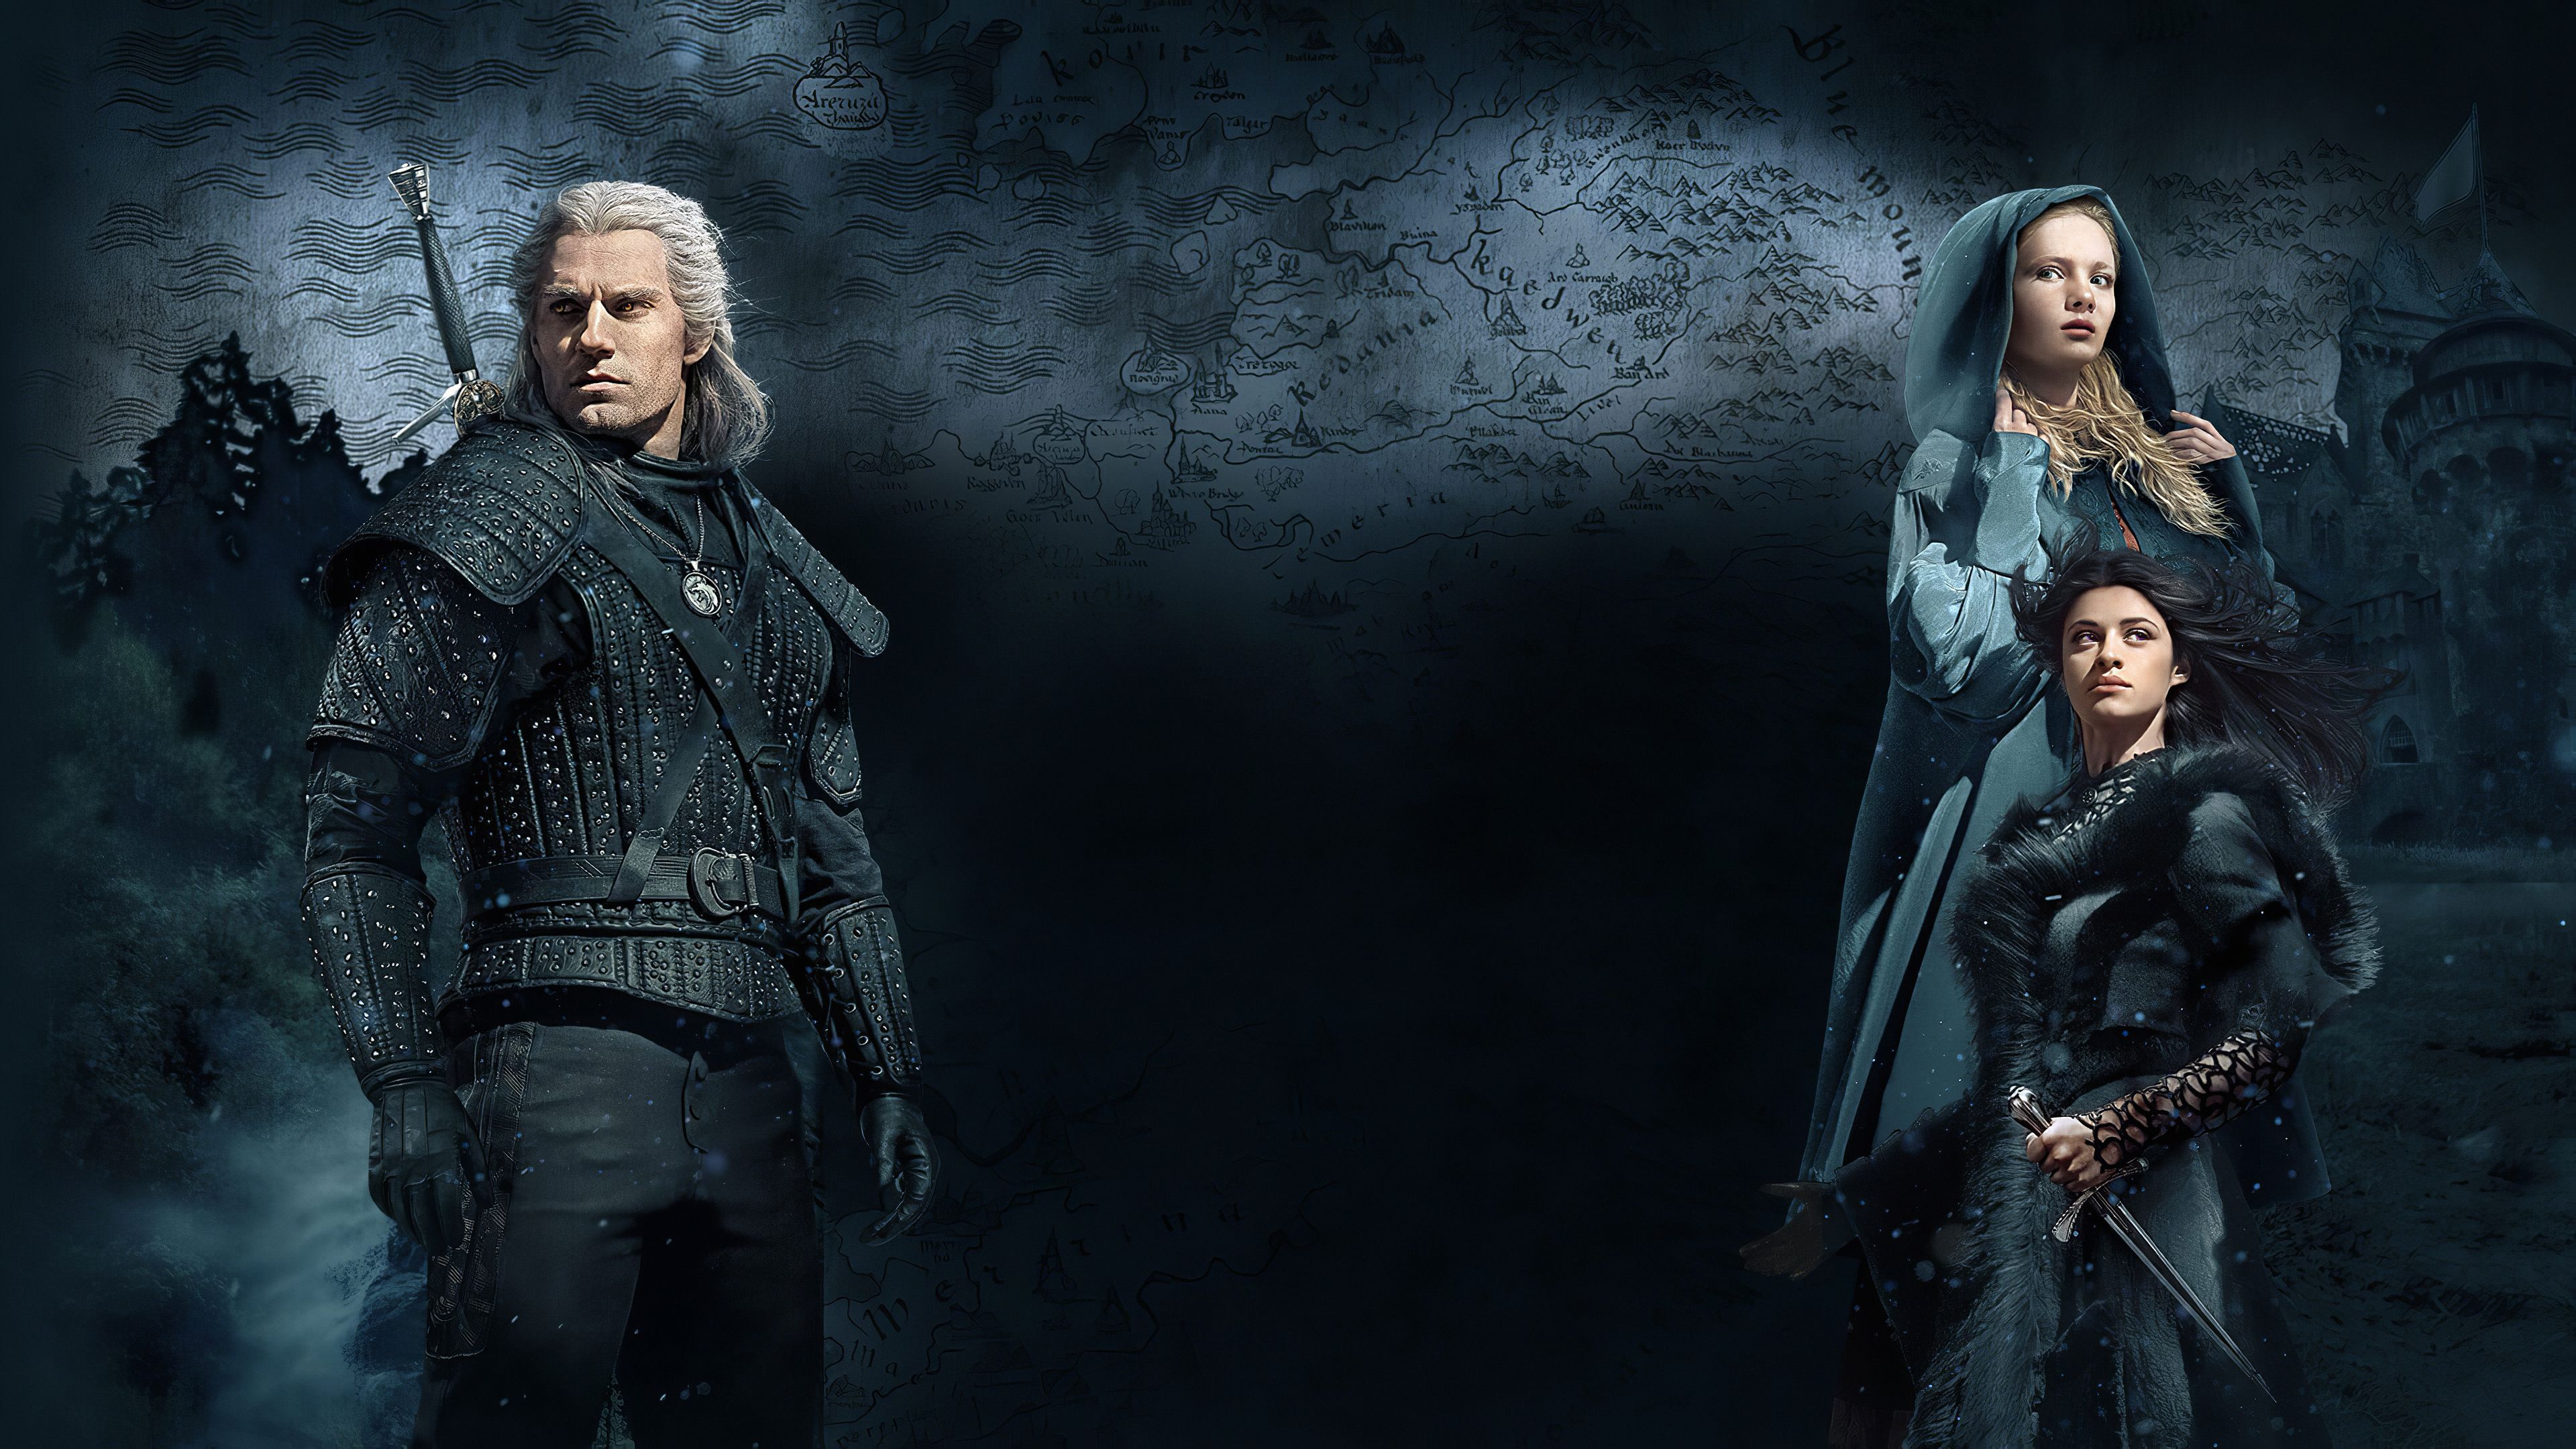 The Witcher 2020 4k, HD Tv Shows, 4k Wallpaper, Image, Background, Photo and Picture